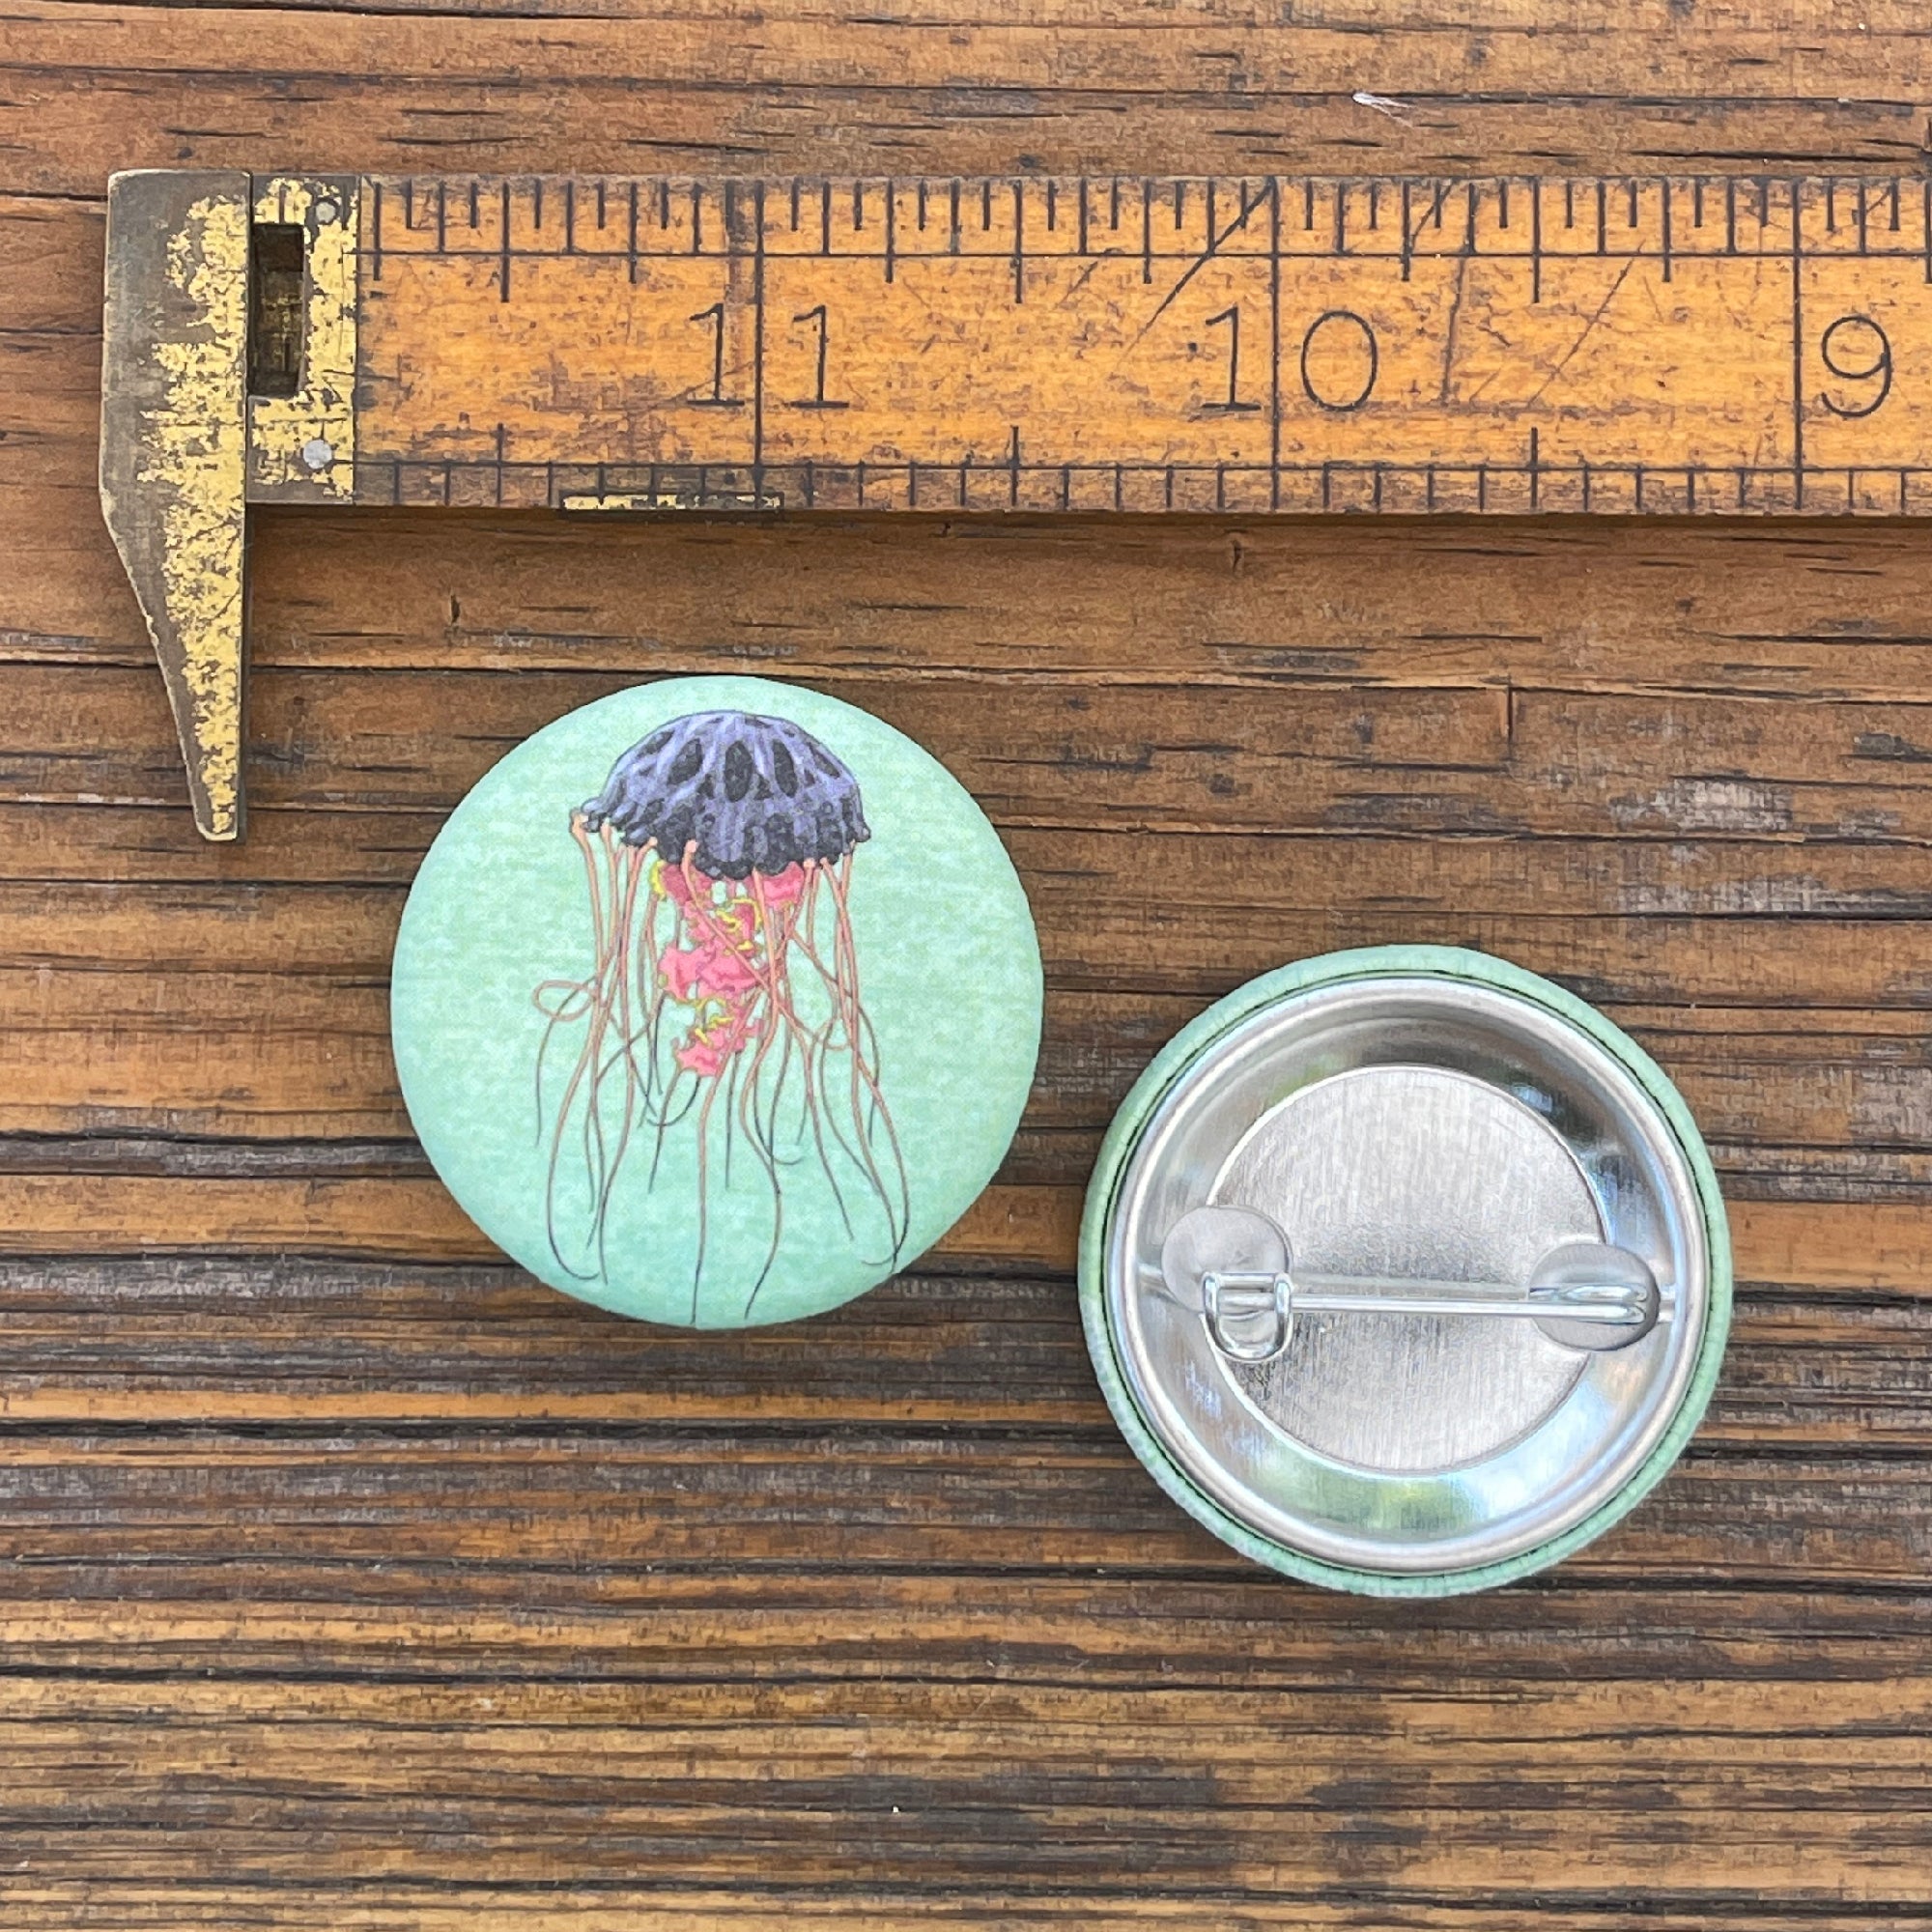 Jellyfish Button Pin - Two Little Fruits